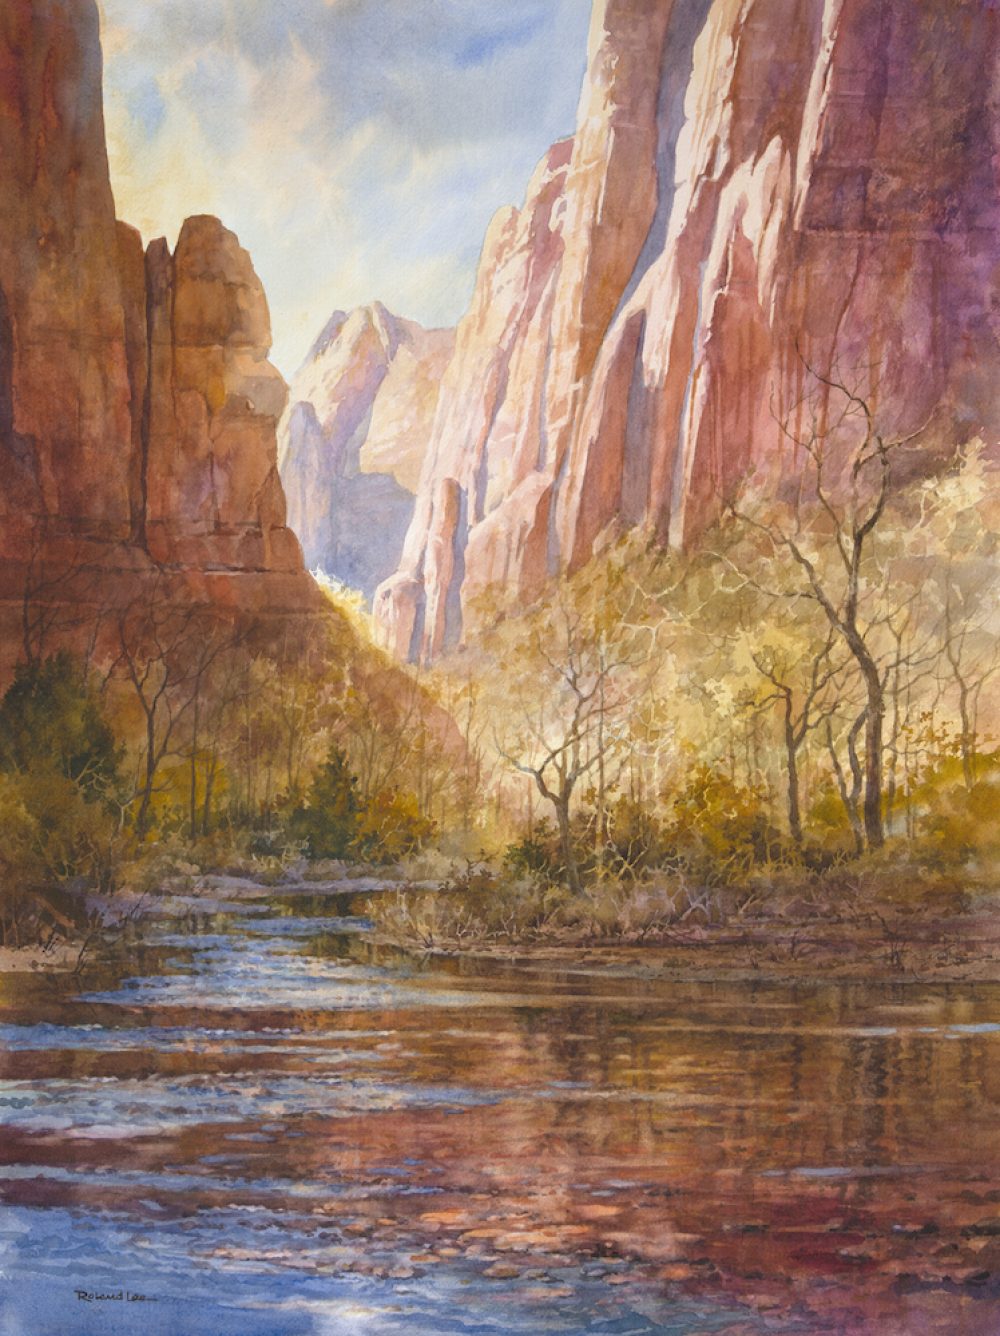 River of Time - Watercolor Painting of landscape in Zion National Park